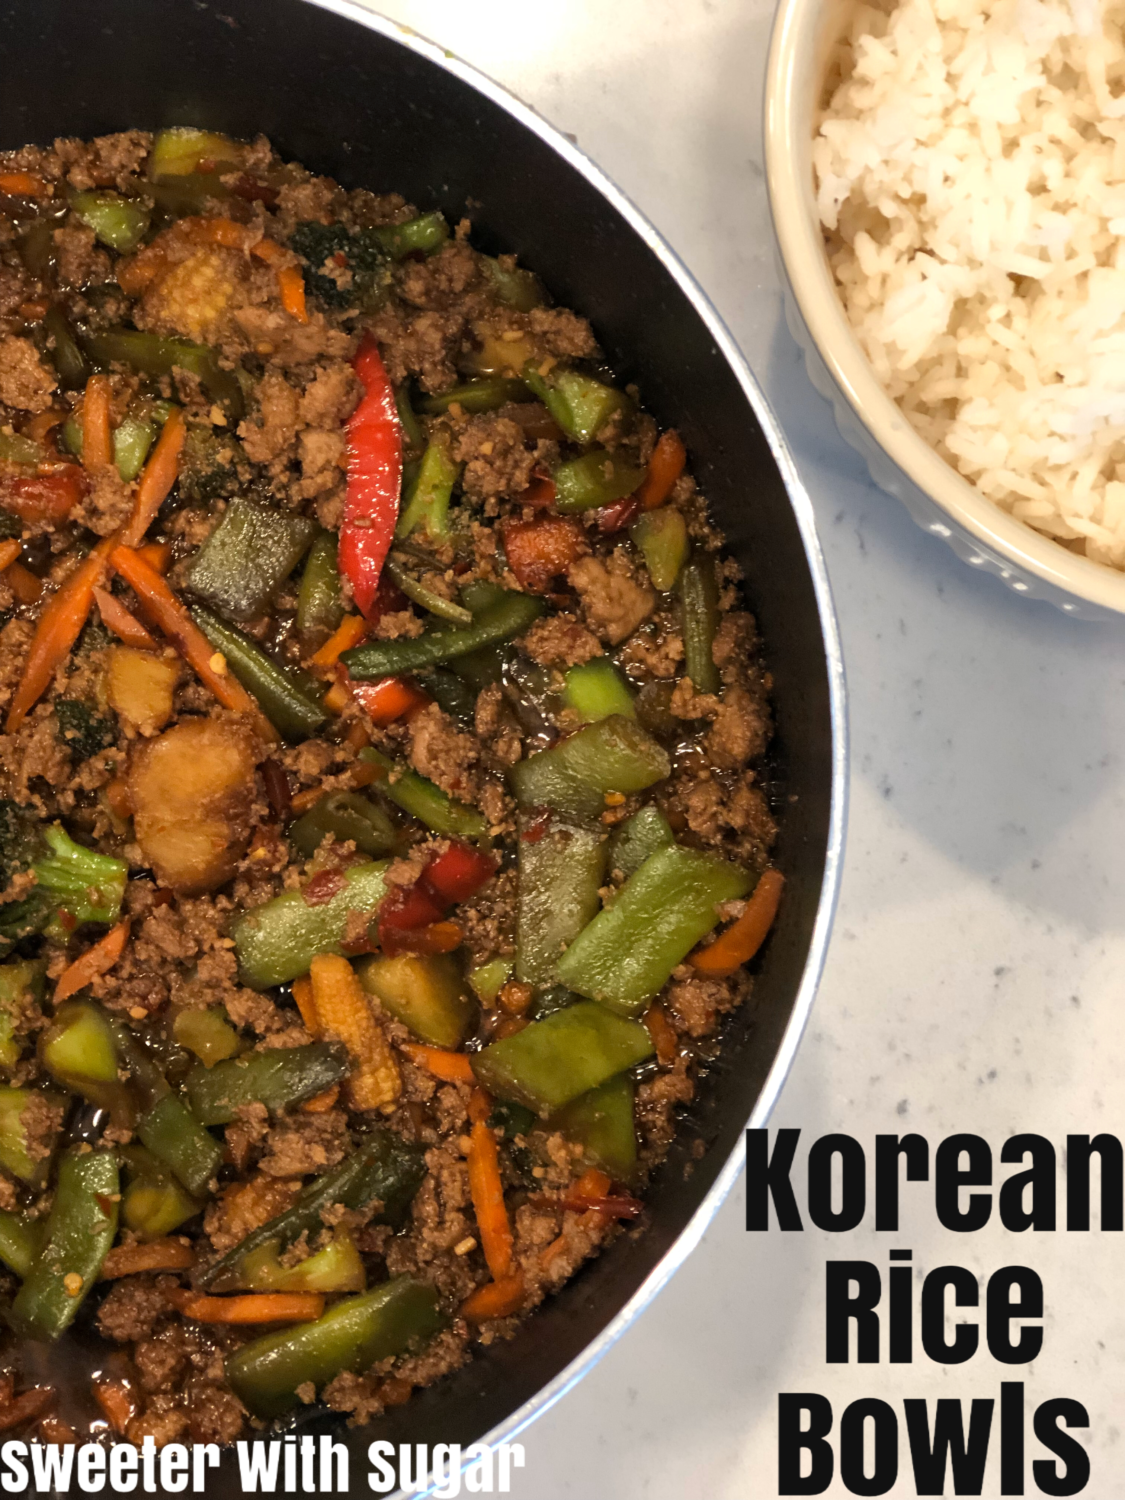 Korean Rice Bowls are a simple dinner recipe made with ground turkey. It is filled with vegetables and a yummy spicy sauce. #DinnerIdeas #AsianDinnerRecipes #GroundTurkey #DinnerRecipes